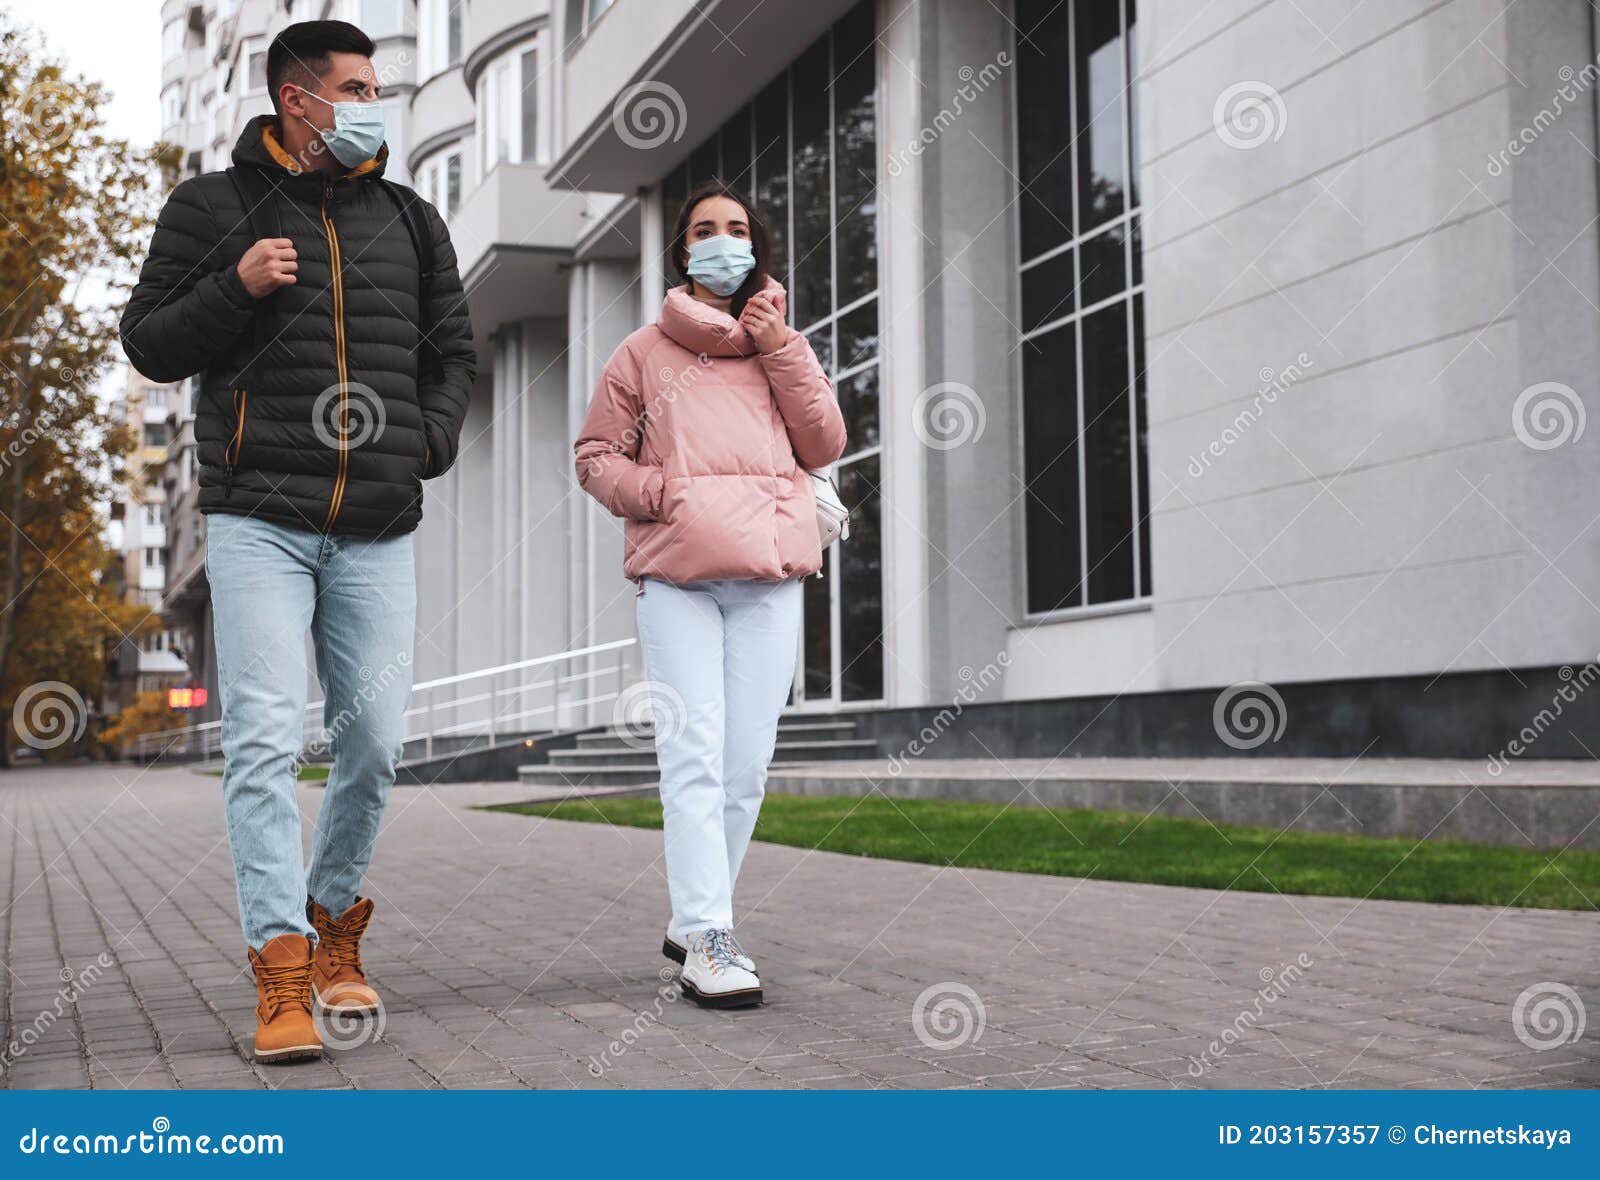 People in Medical Face Masks Walking Outdoors. Personal Protection ...